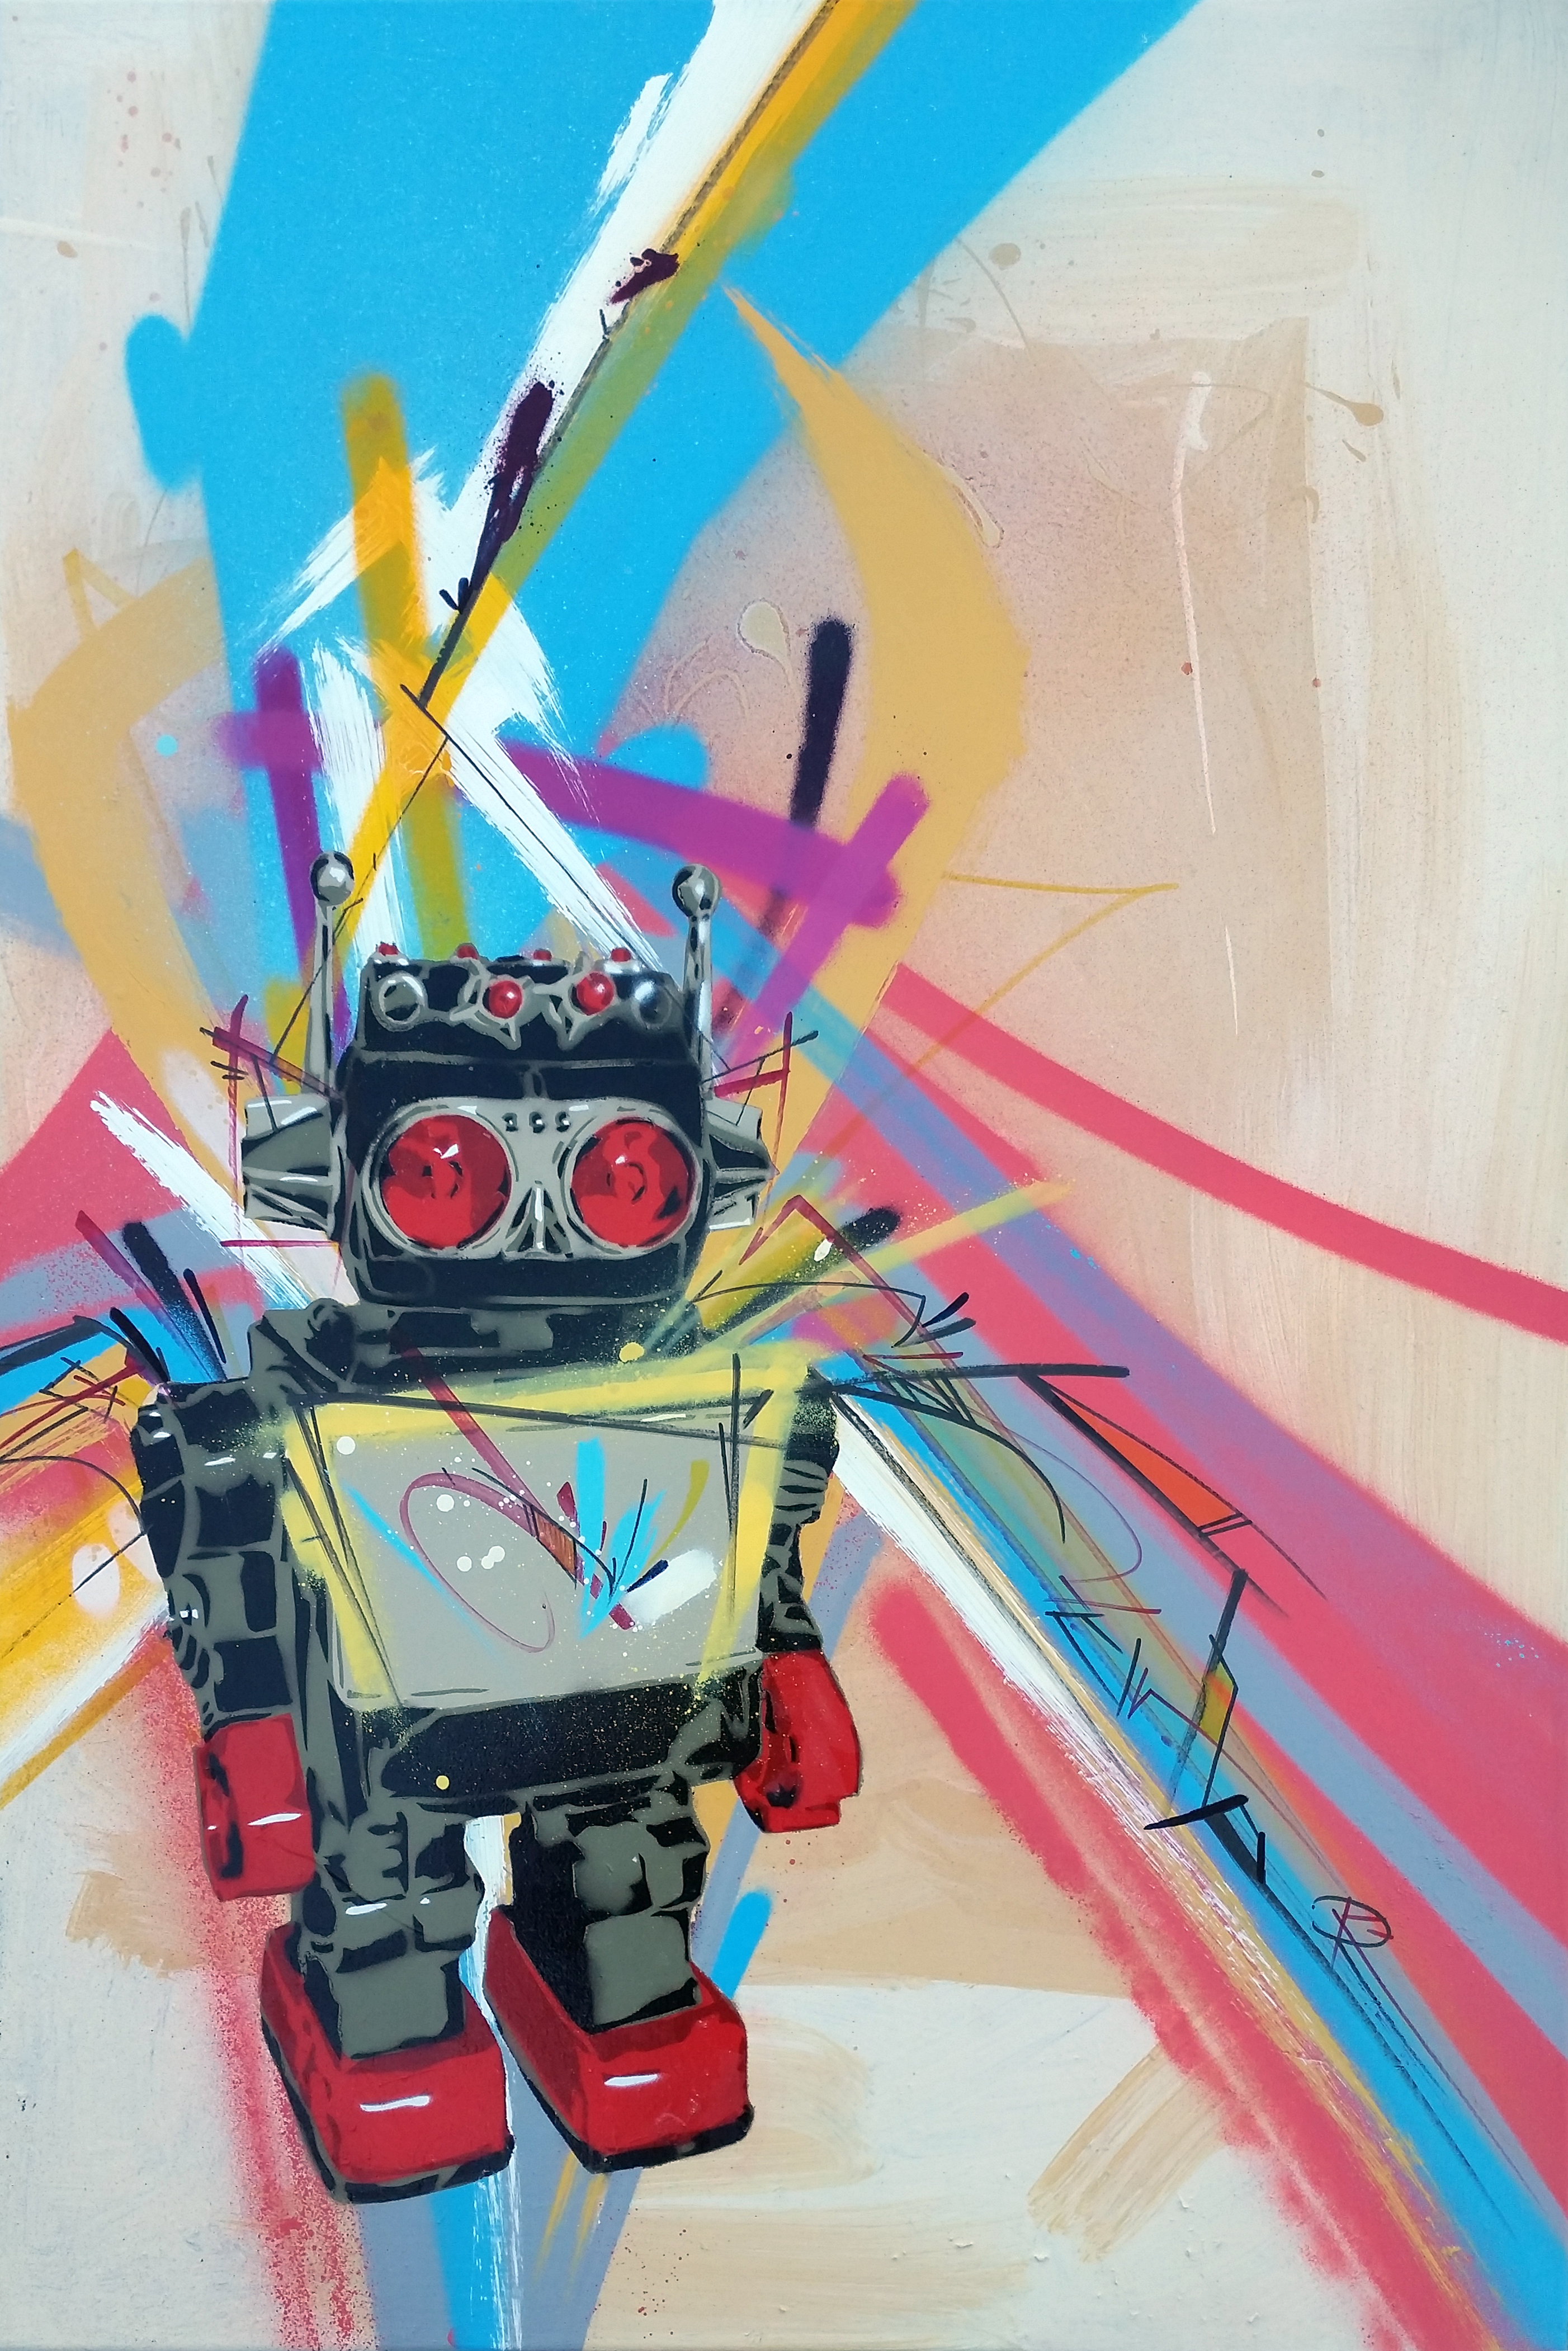 robot painting by bob peck and rich cihlar also known as Don't Panic! spray paint and stencil art and abstract art